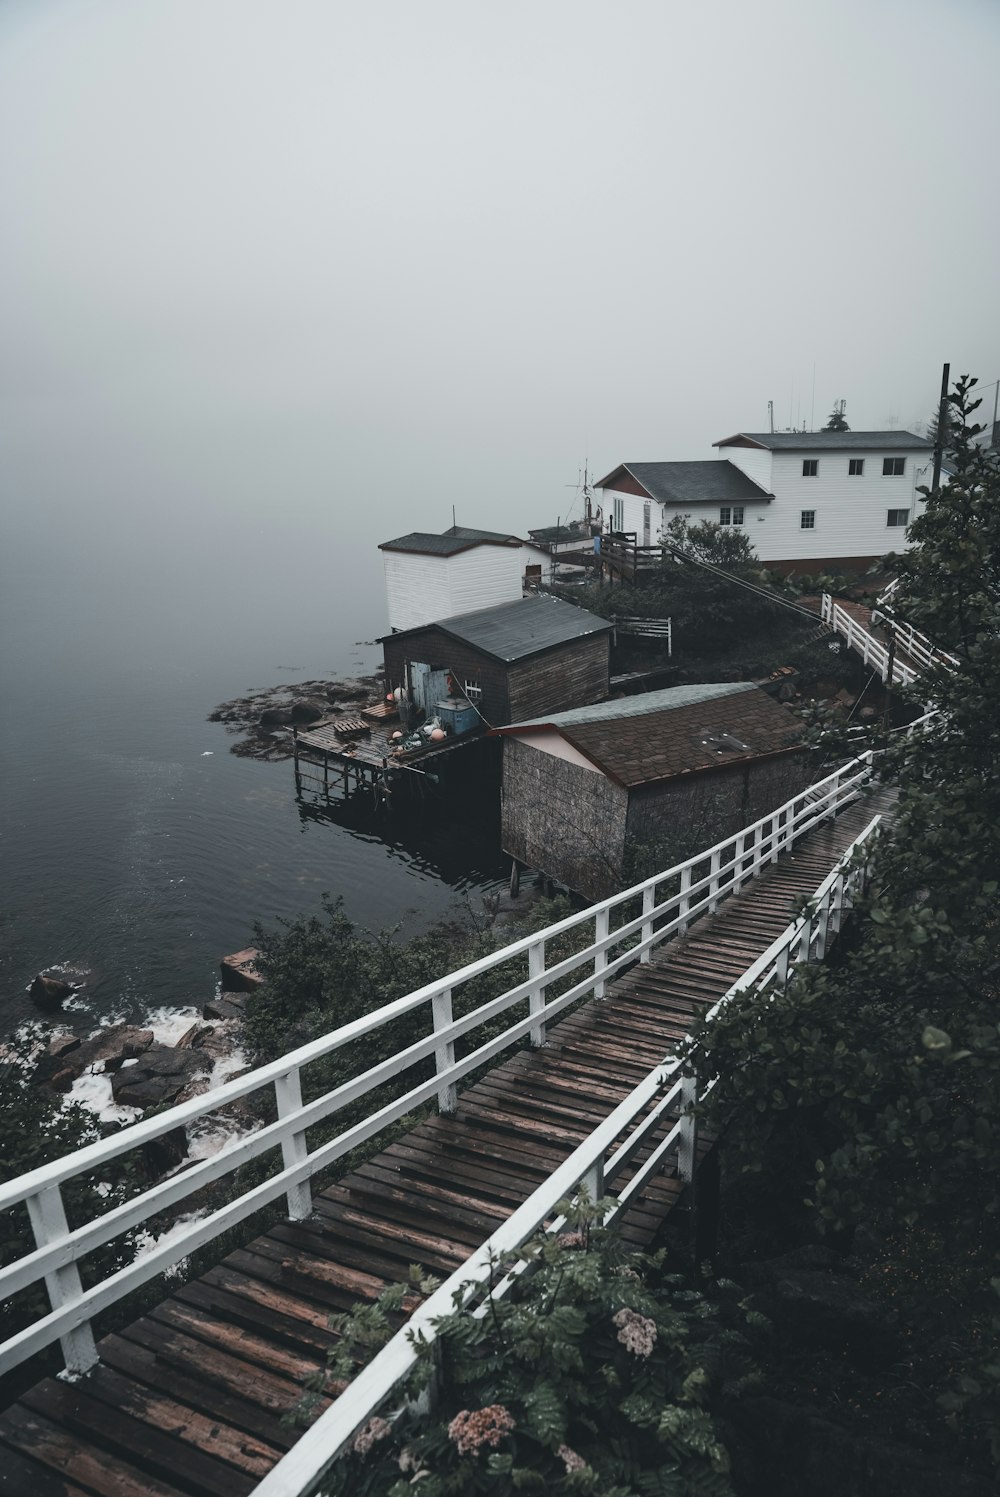 a foggy day at a dock with a house on the water